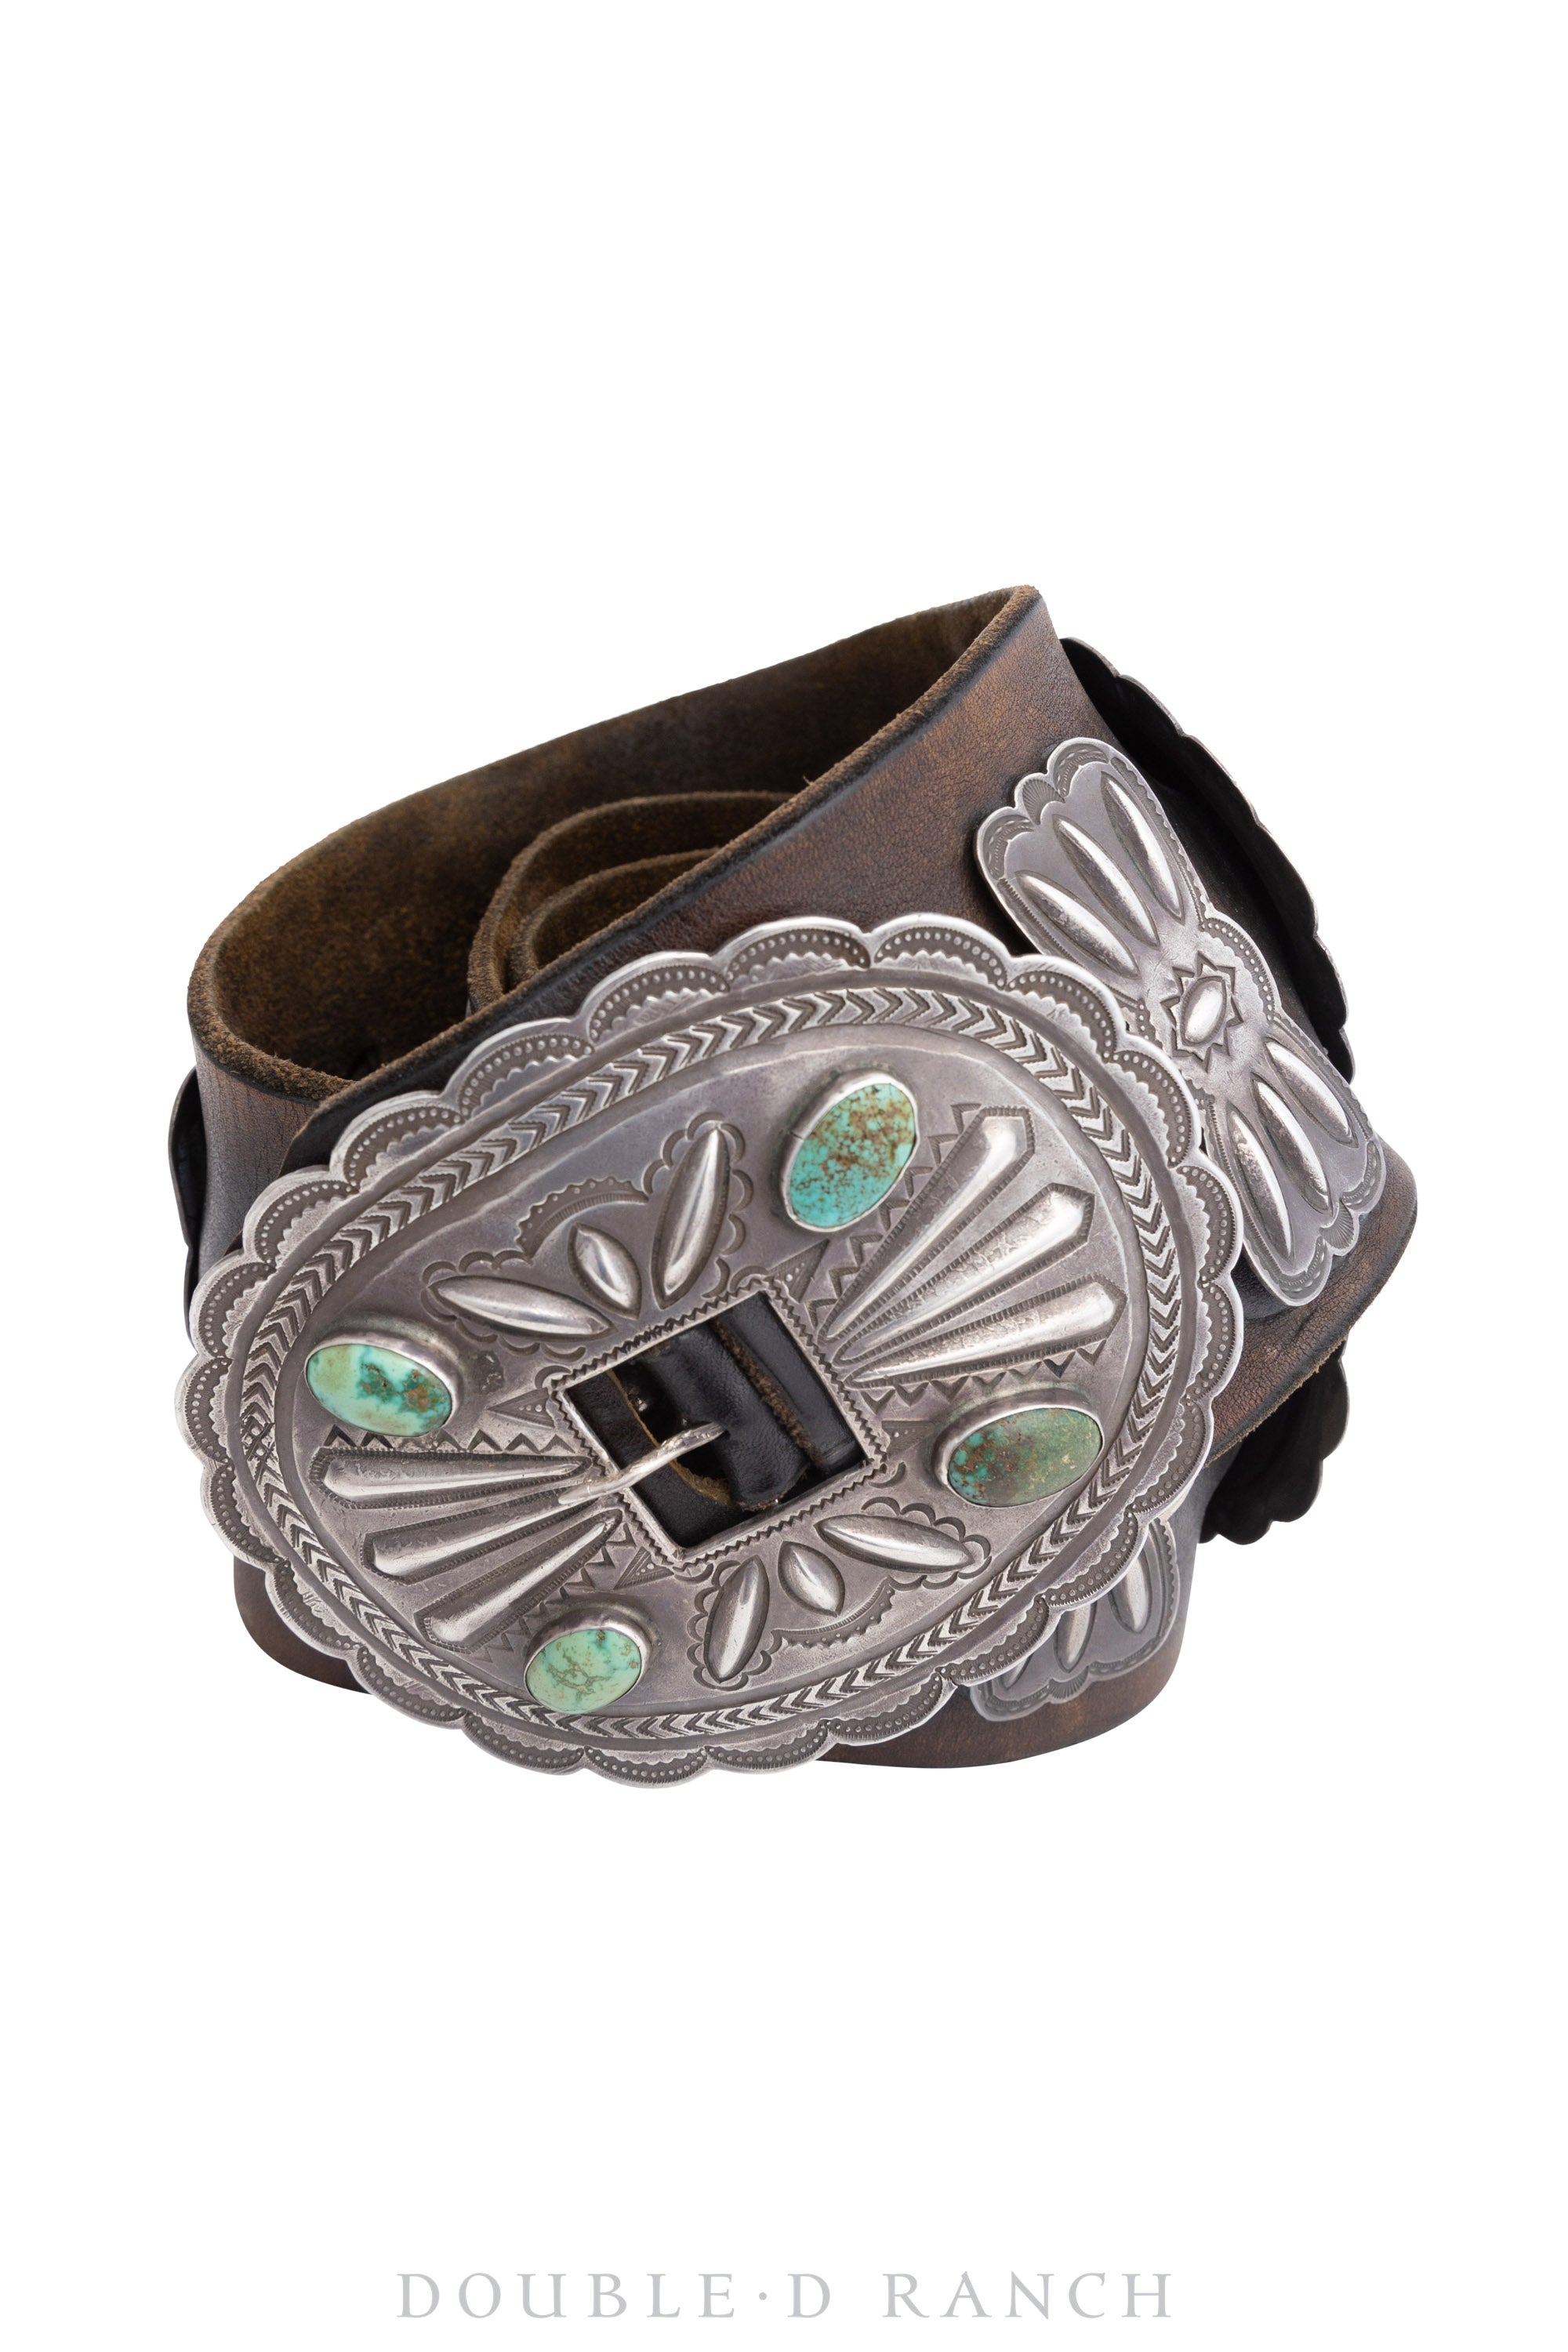 Belt, Concho, 1st Phase Concho with Third Phase Buckle, First-Quarter 20th Century, Antique with Provenance, 145